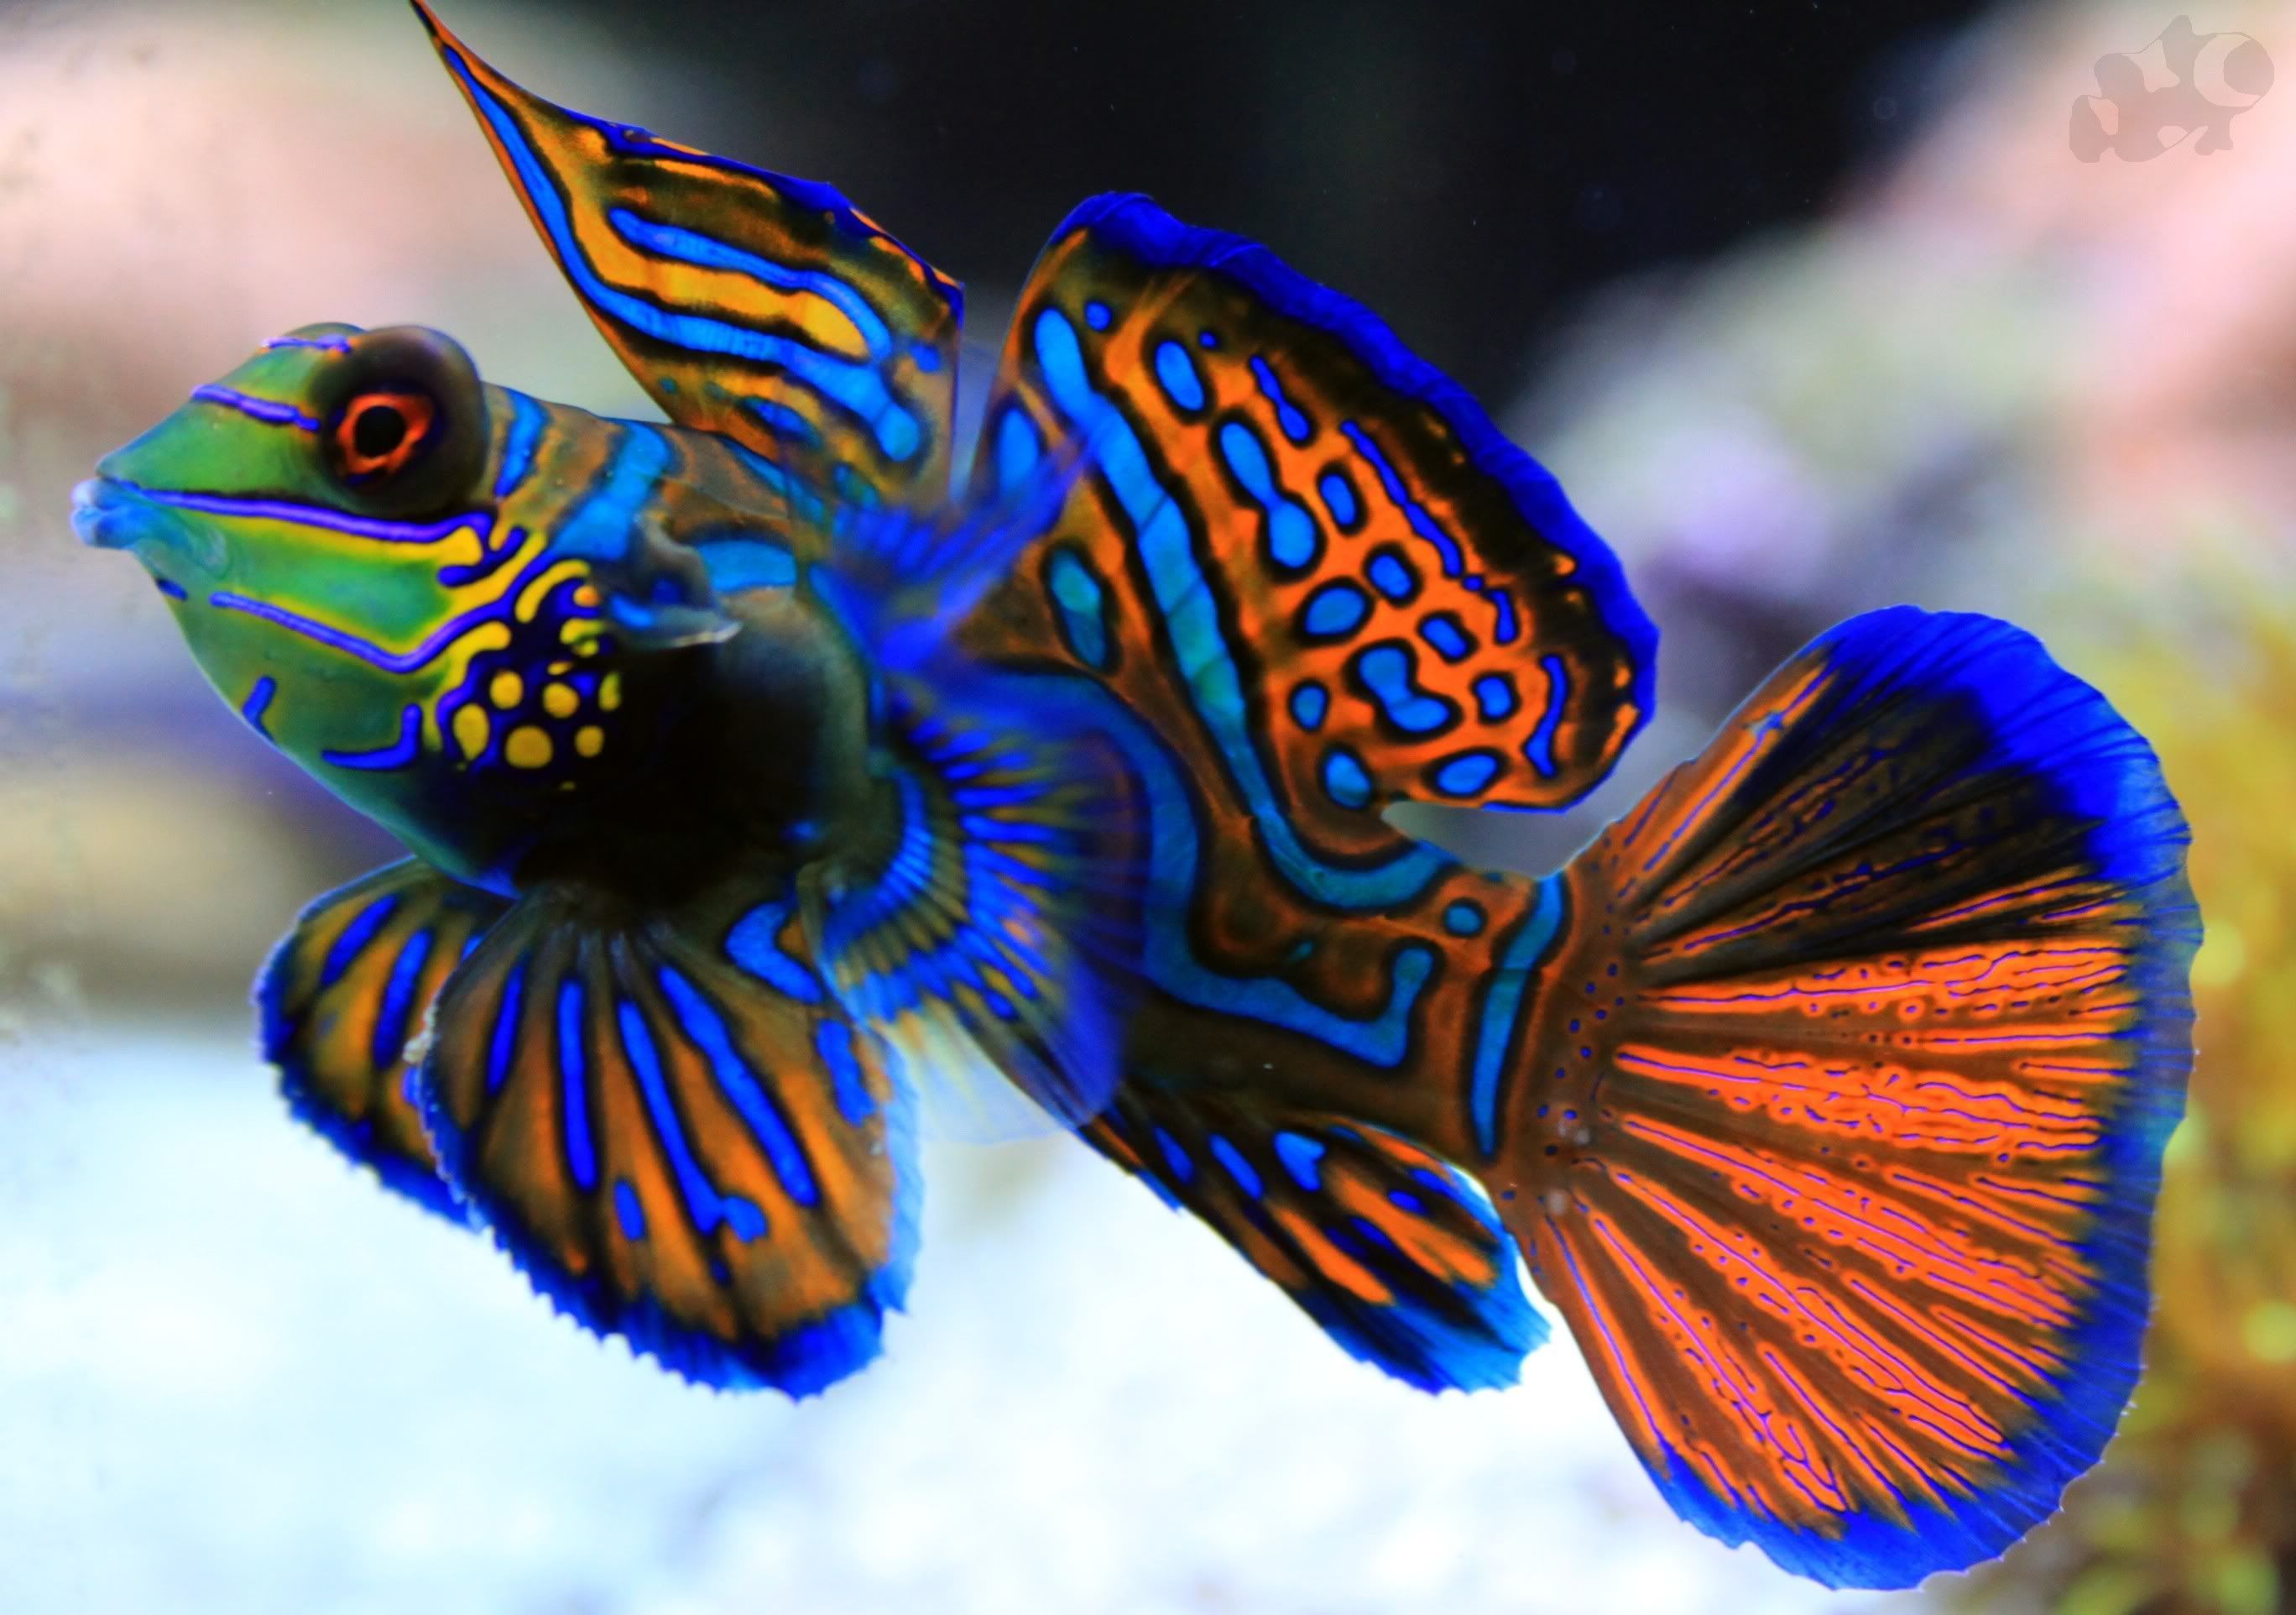 The mandarinfish or mandarin dragonet is a small, brightly colored